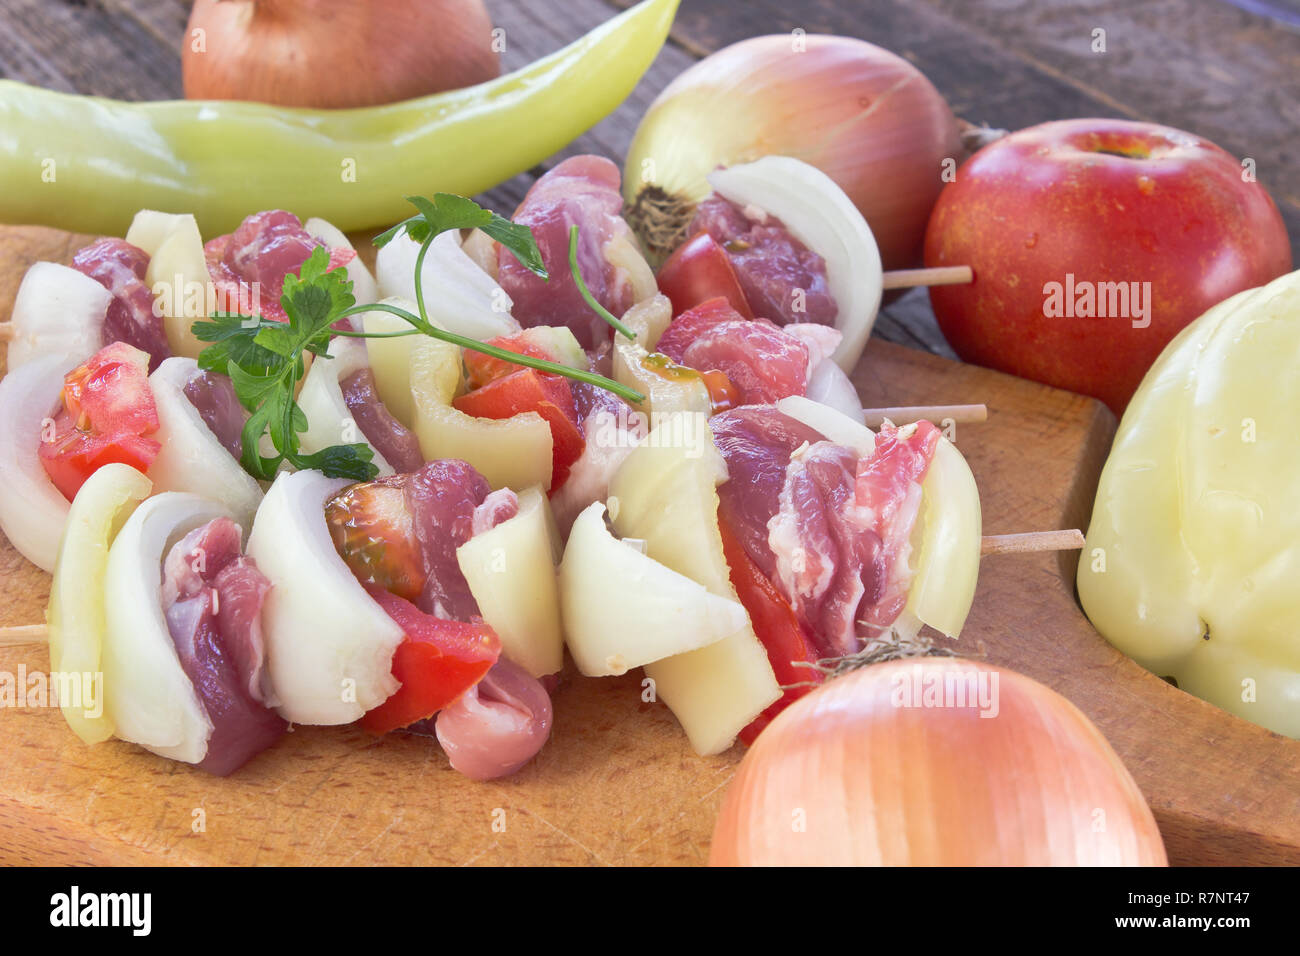 Raw meat for grill with vegetables on cutting board Stock Photo